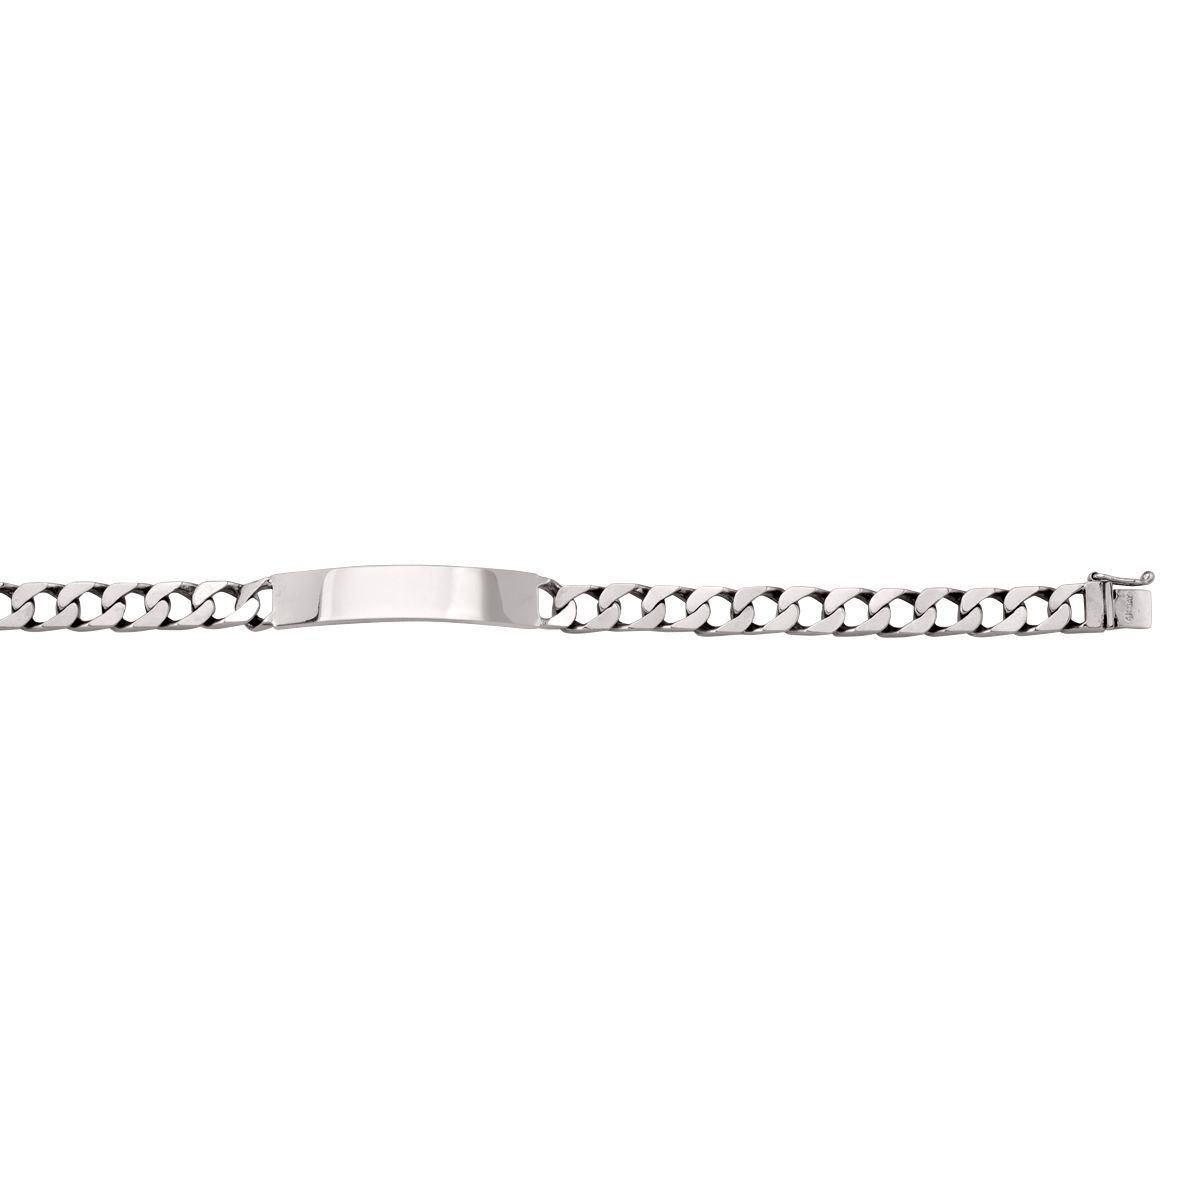 B0204, Gold Bracelet, Engravable ID, Yellow or White Gold